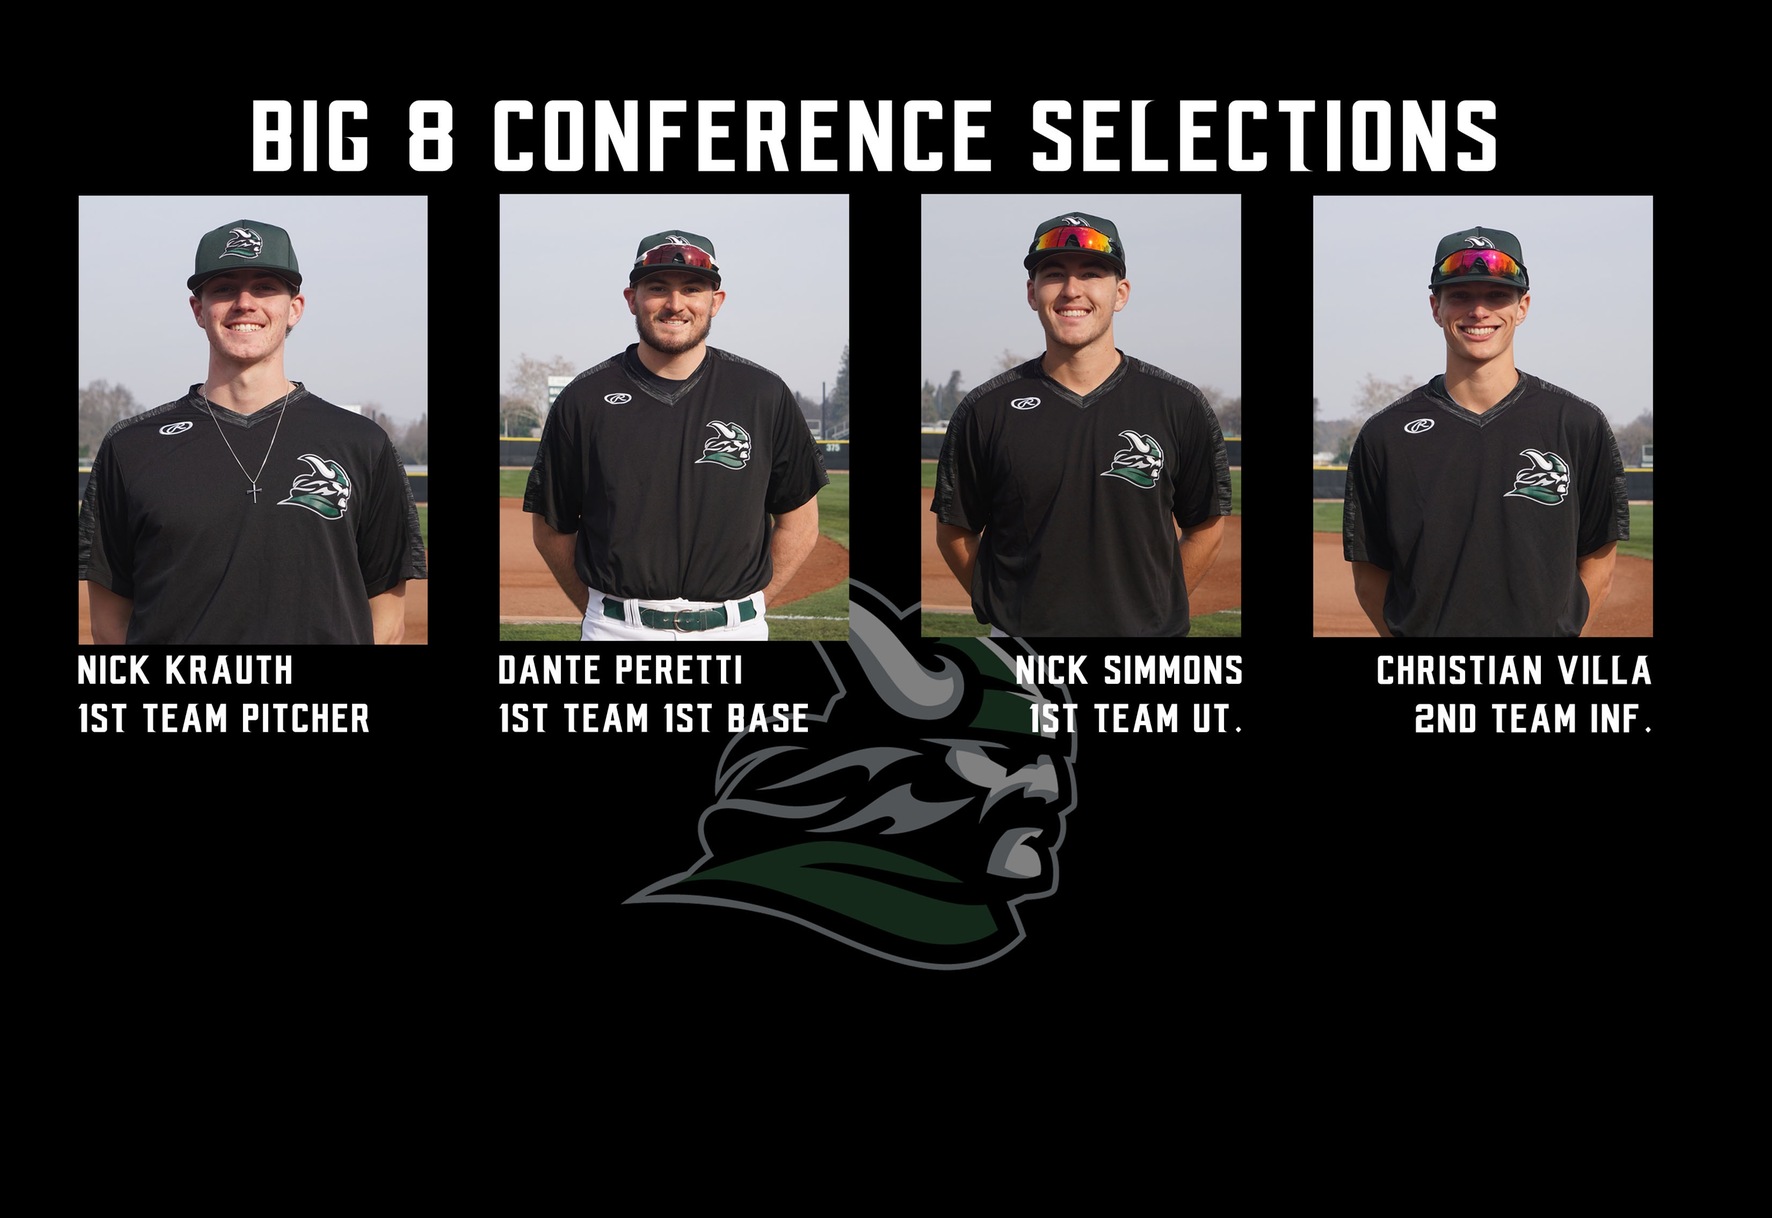 4 Vikes named to Big 8 All-Conference Teams